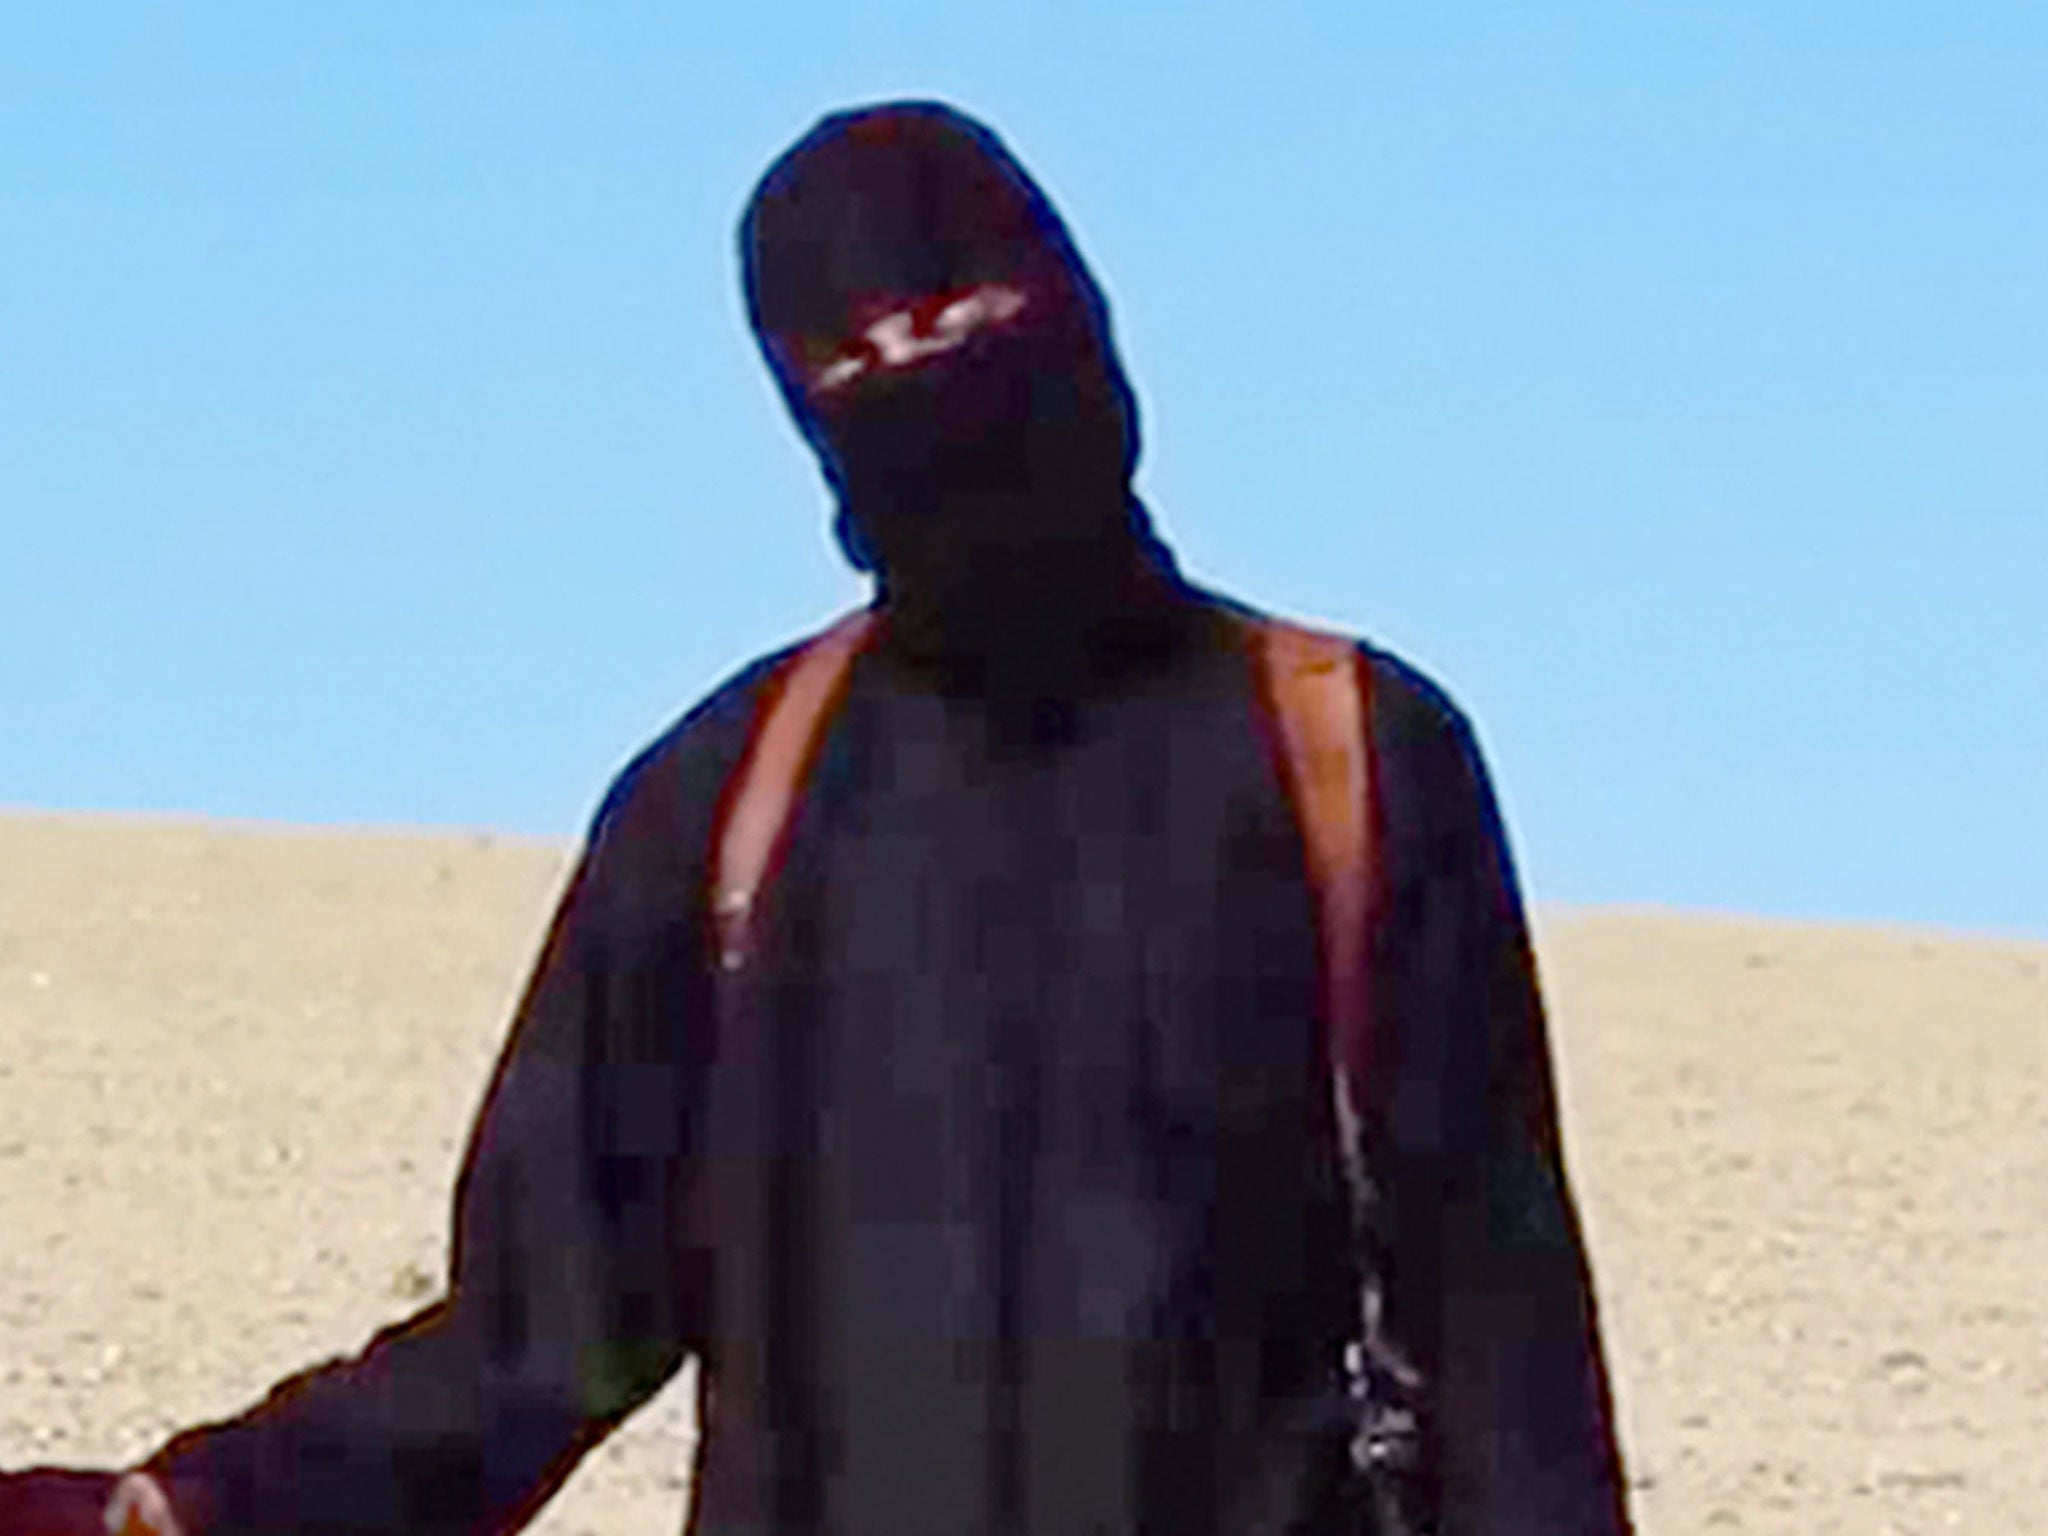 Jihadi John's recruiter Rabah Tahari is wanted by British and Turkish security after he disclosed his location on LinkedIn